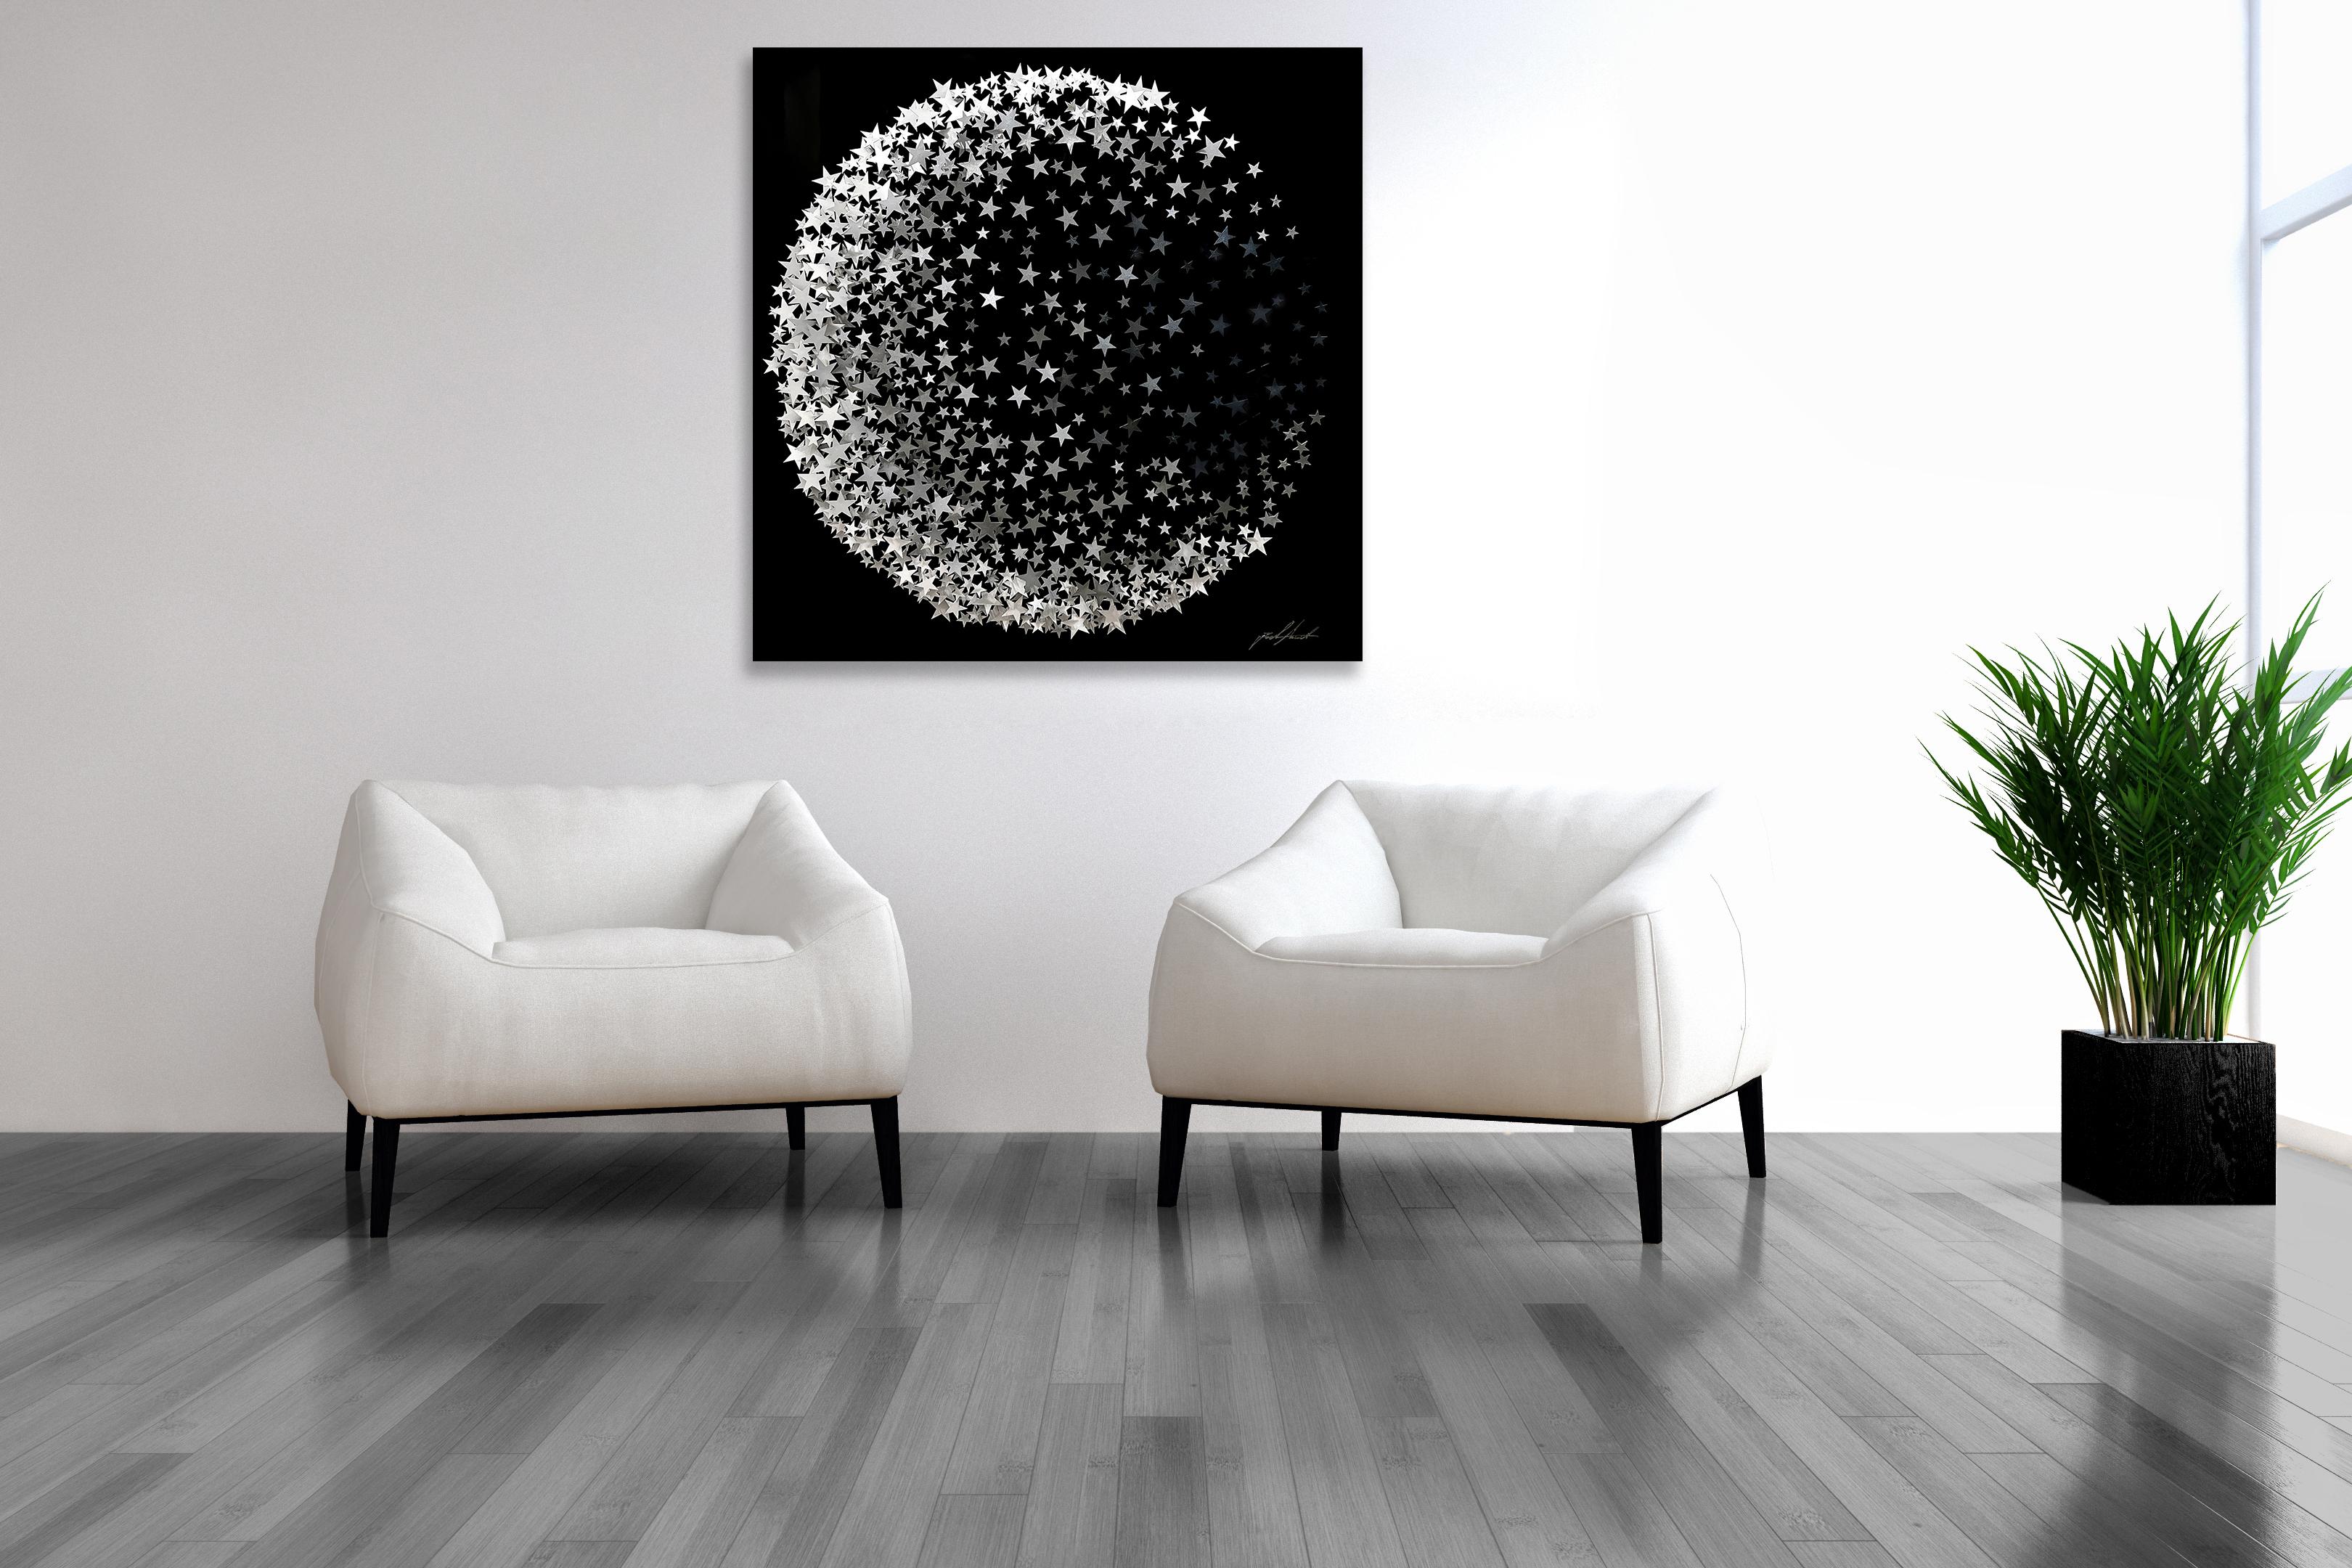 ''Moon'' is a unique mix medium hand painted metal wall sculpture on wood panel by Joel Amit. The artwork comes with a certificate of authenticity and artist's book. This piece is signed and comes ready hang. 

Amit begins each of his pieces with a